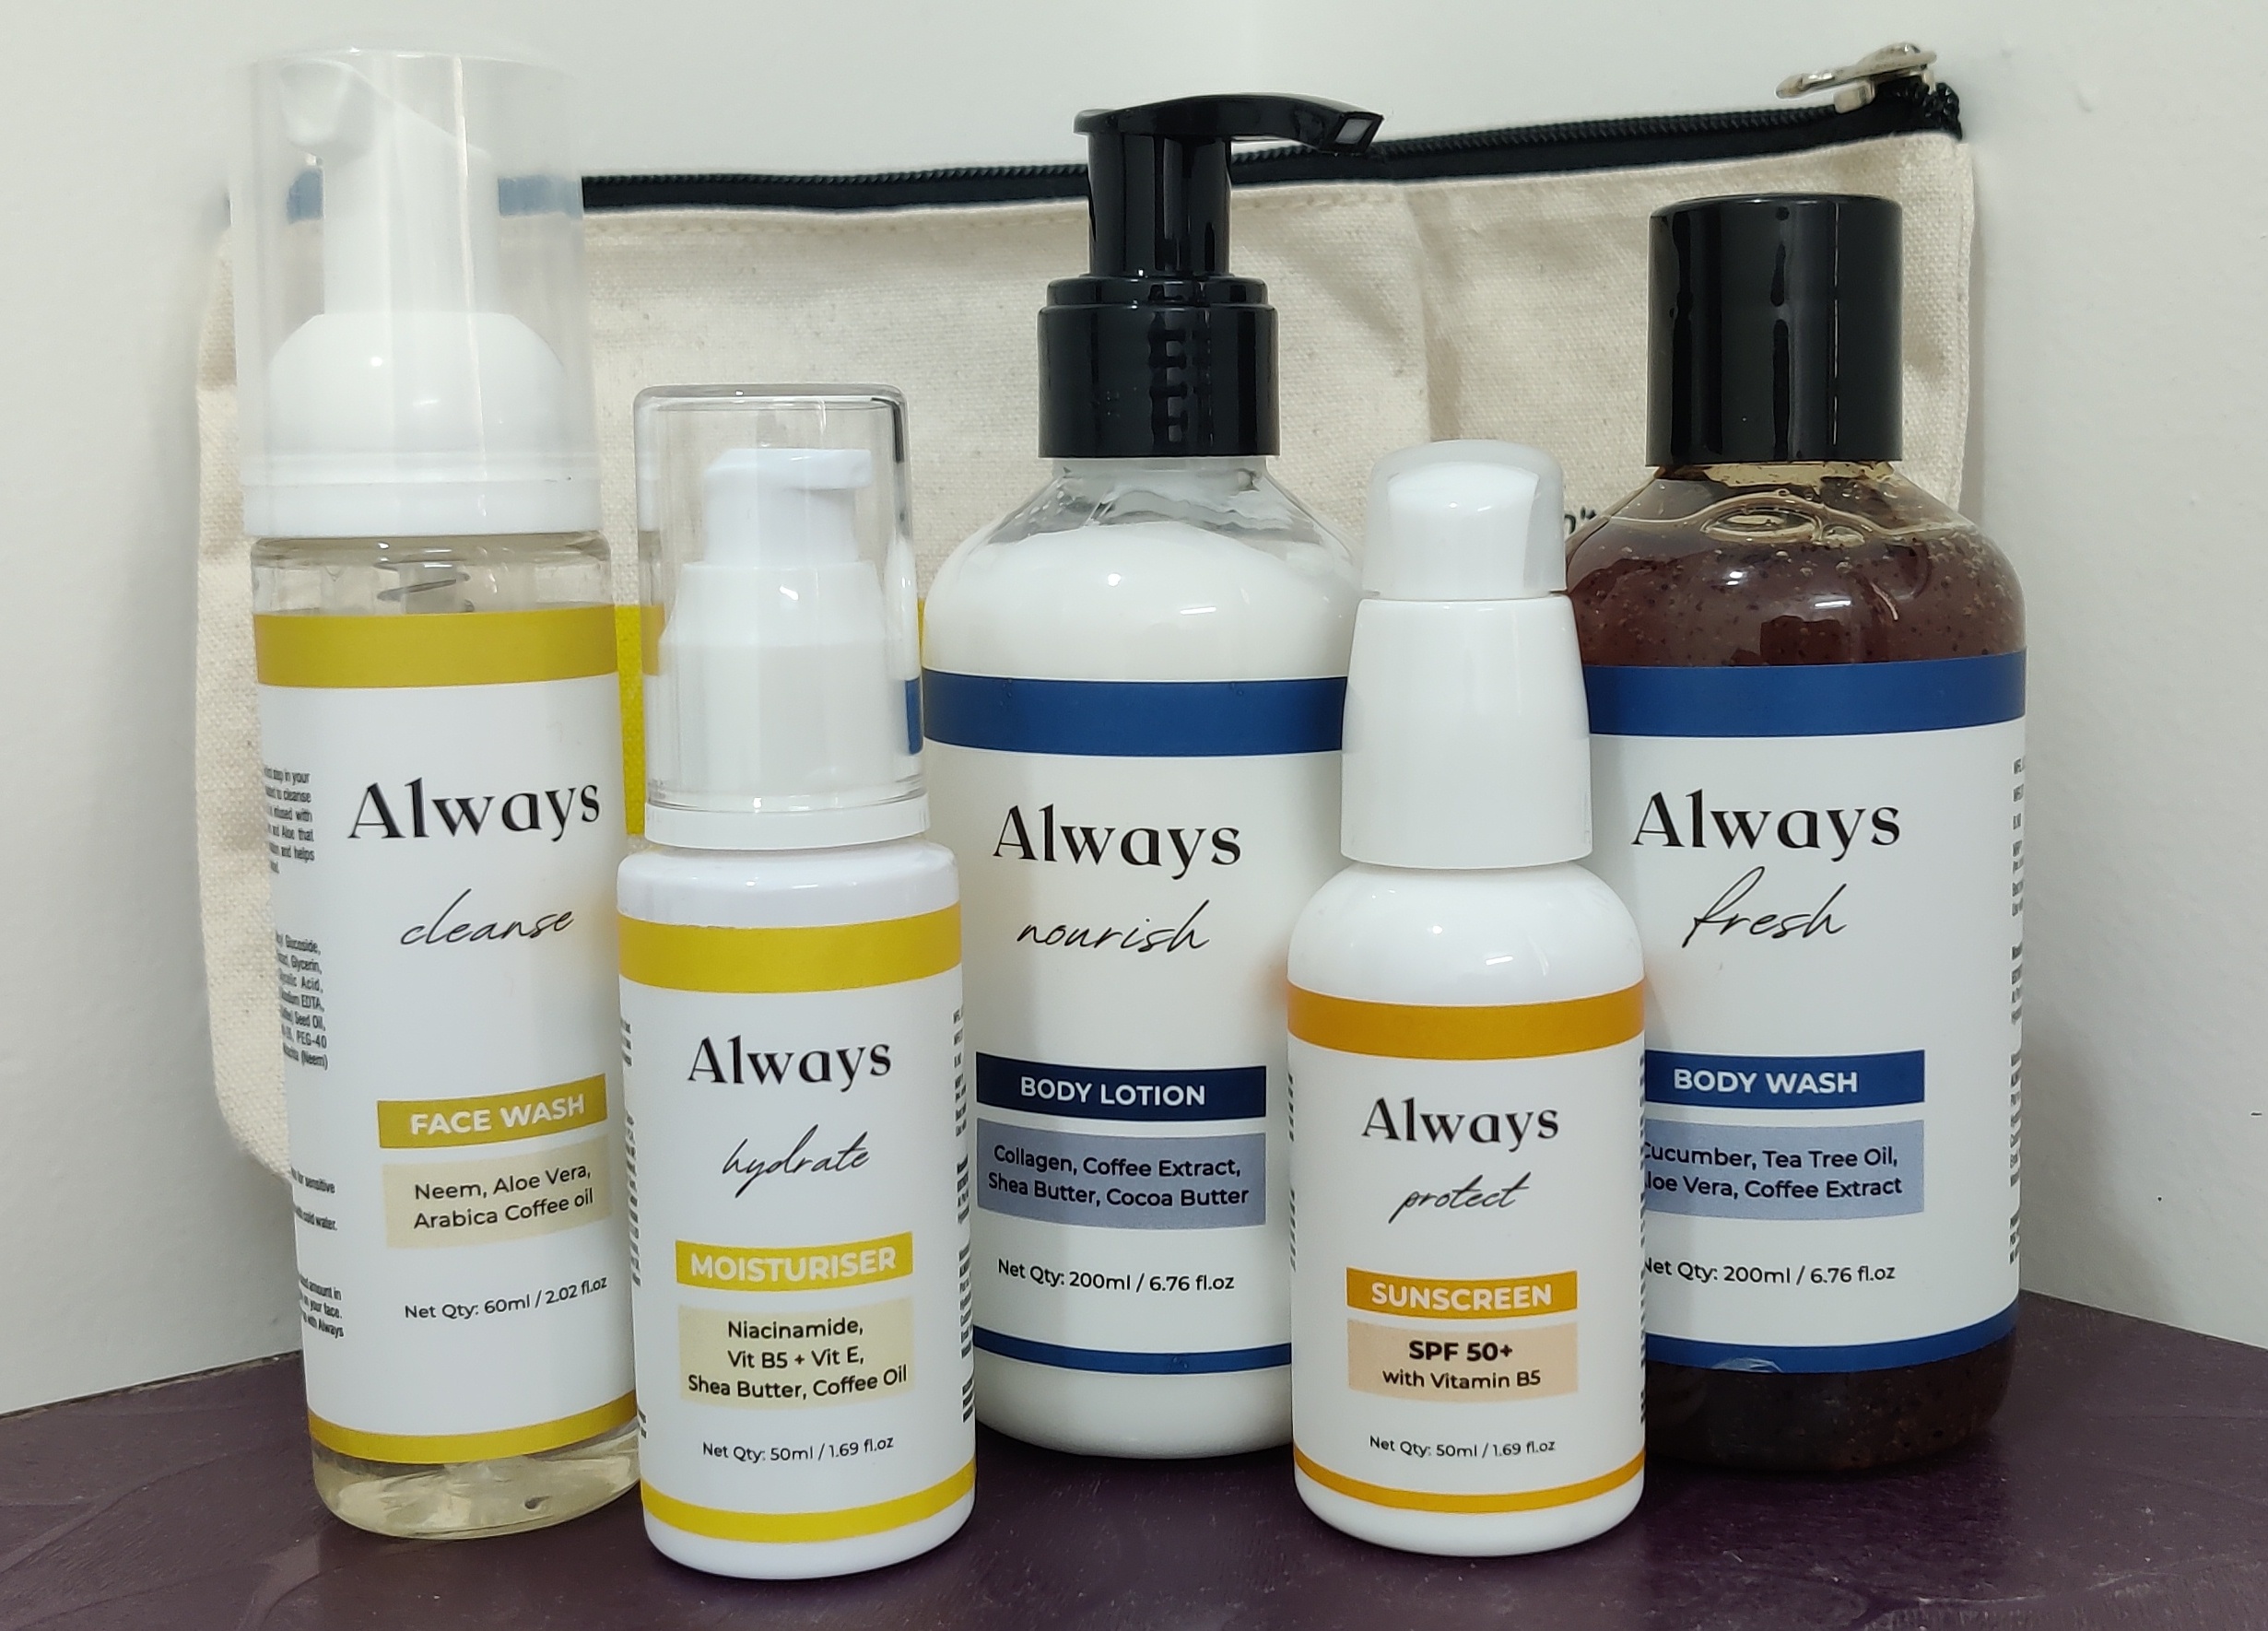 Always Personal Care Range made by Daily Athletes